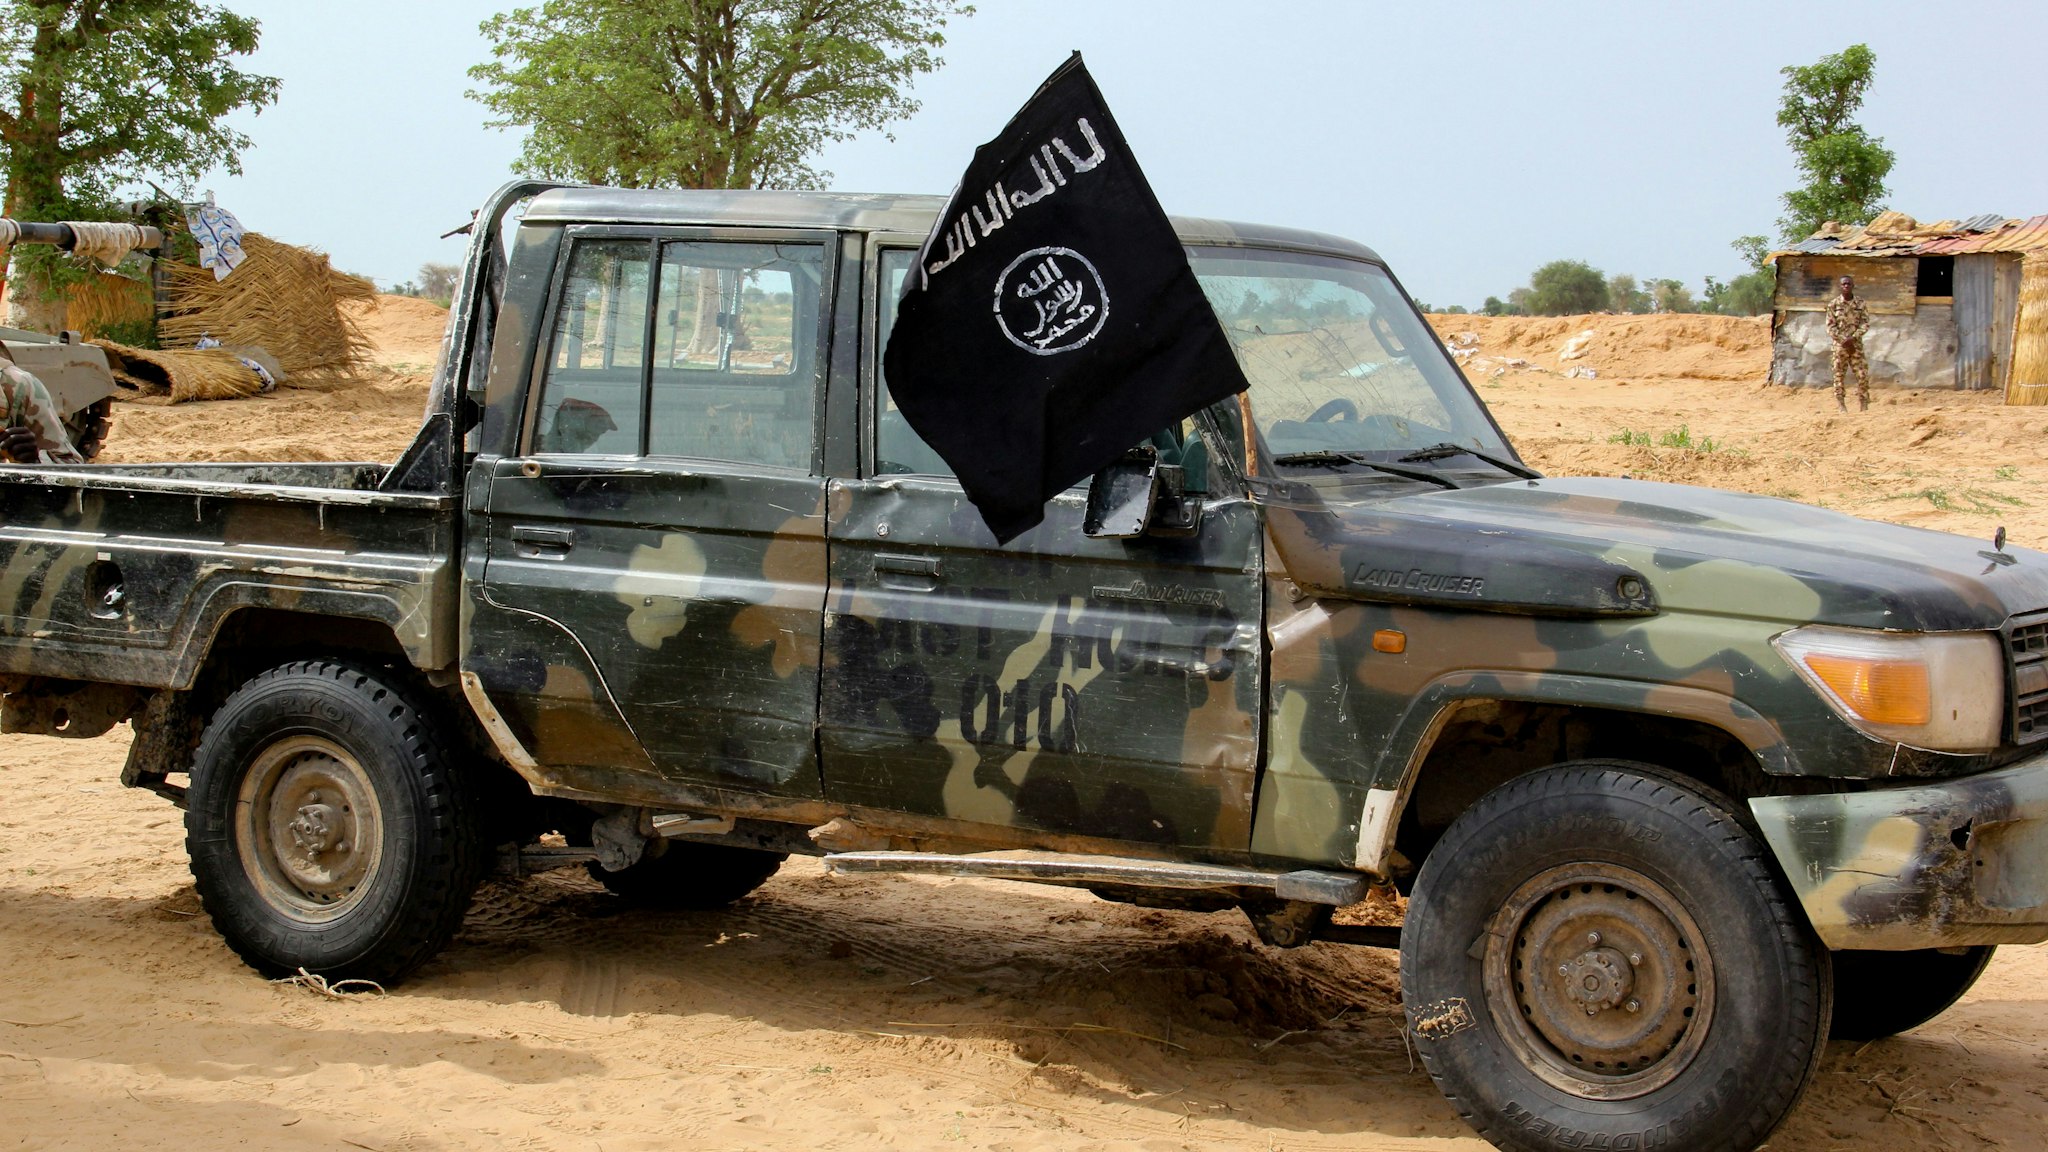 A vehicle allegedly belonging to the Islamic State group in West Africa (ISWAP) is seen in Baga on August 2, 2019. - Intense fighting between a regional force and the Islamic State group in West Africa (ISWAP) has resulted in dozens of deaths, including at least 25 soldiers and more than 40 jihadists, in northeastern Nigeria. ISWAP broke away from Boko Haram in 2016 in part due to its rejection of indiscriminate attacks on civilians. Last year the group witnessed a reported takeover by more hardline fighters who sidelined its leader and executed his deputy. The IS-affiliate has since July 2018 ratcheted up a campaign of attacks against military targets.